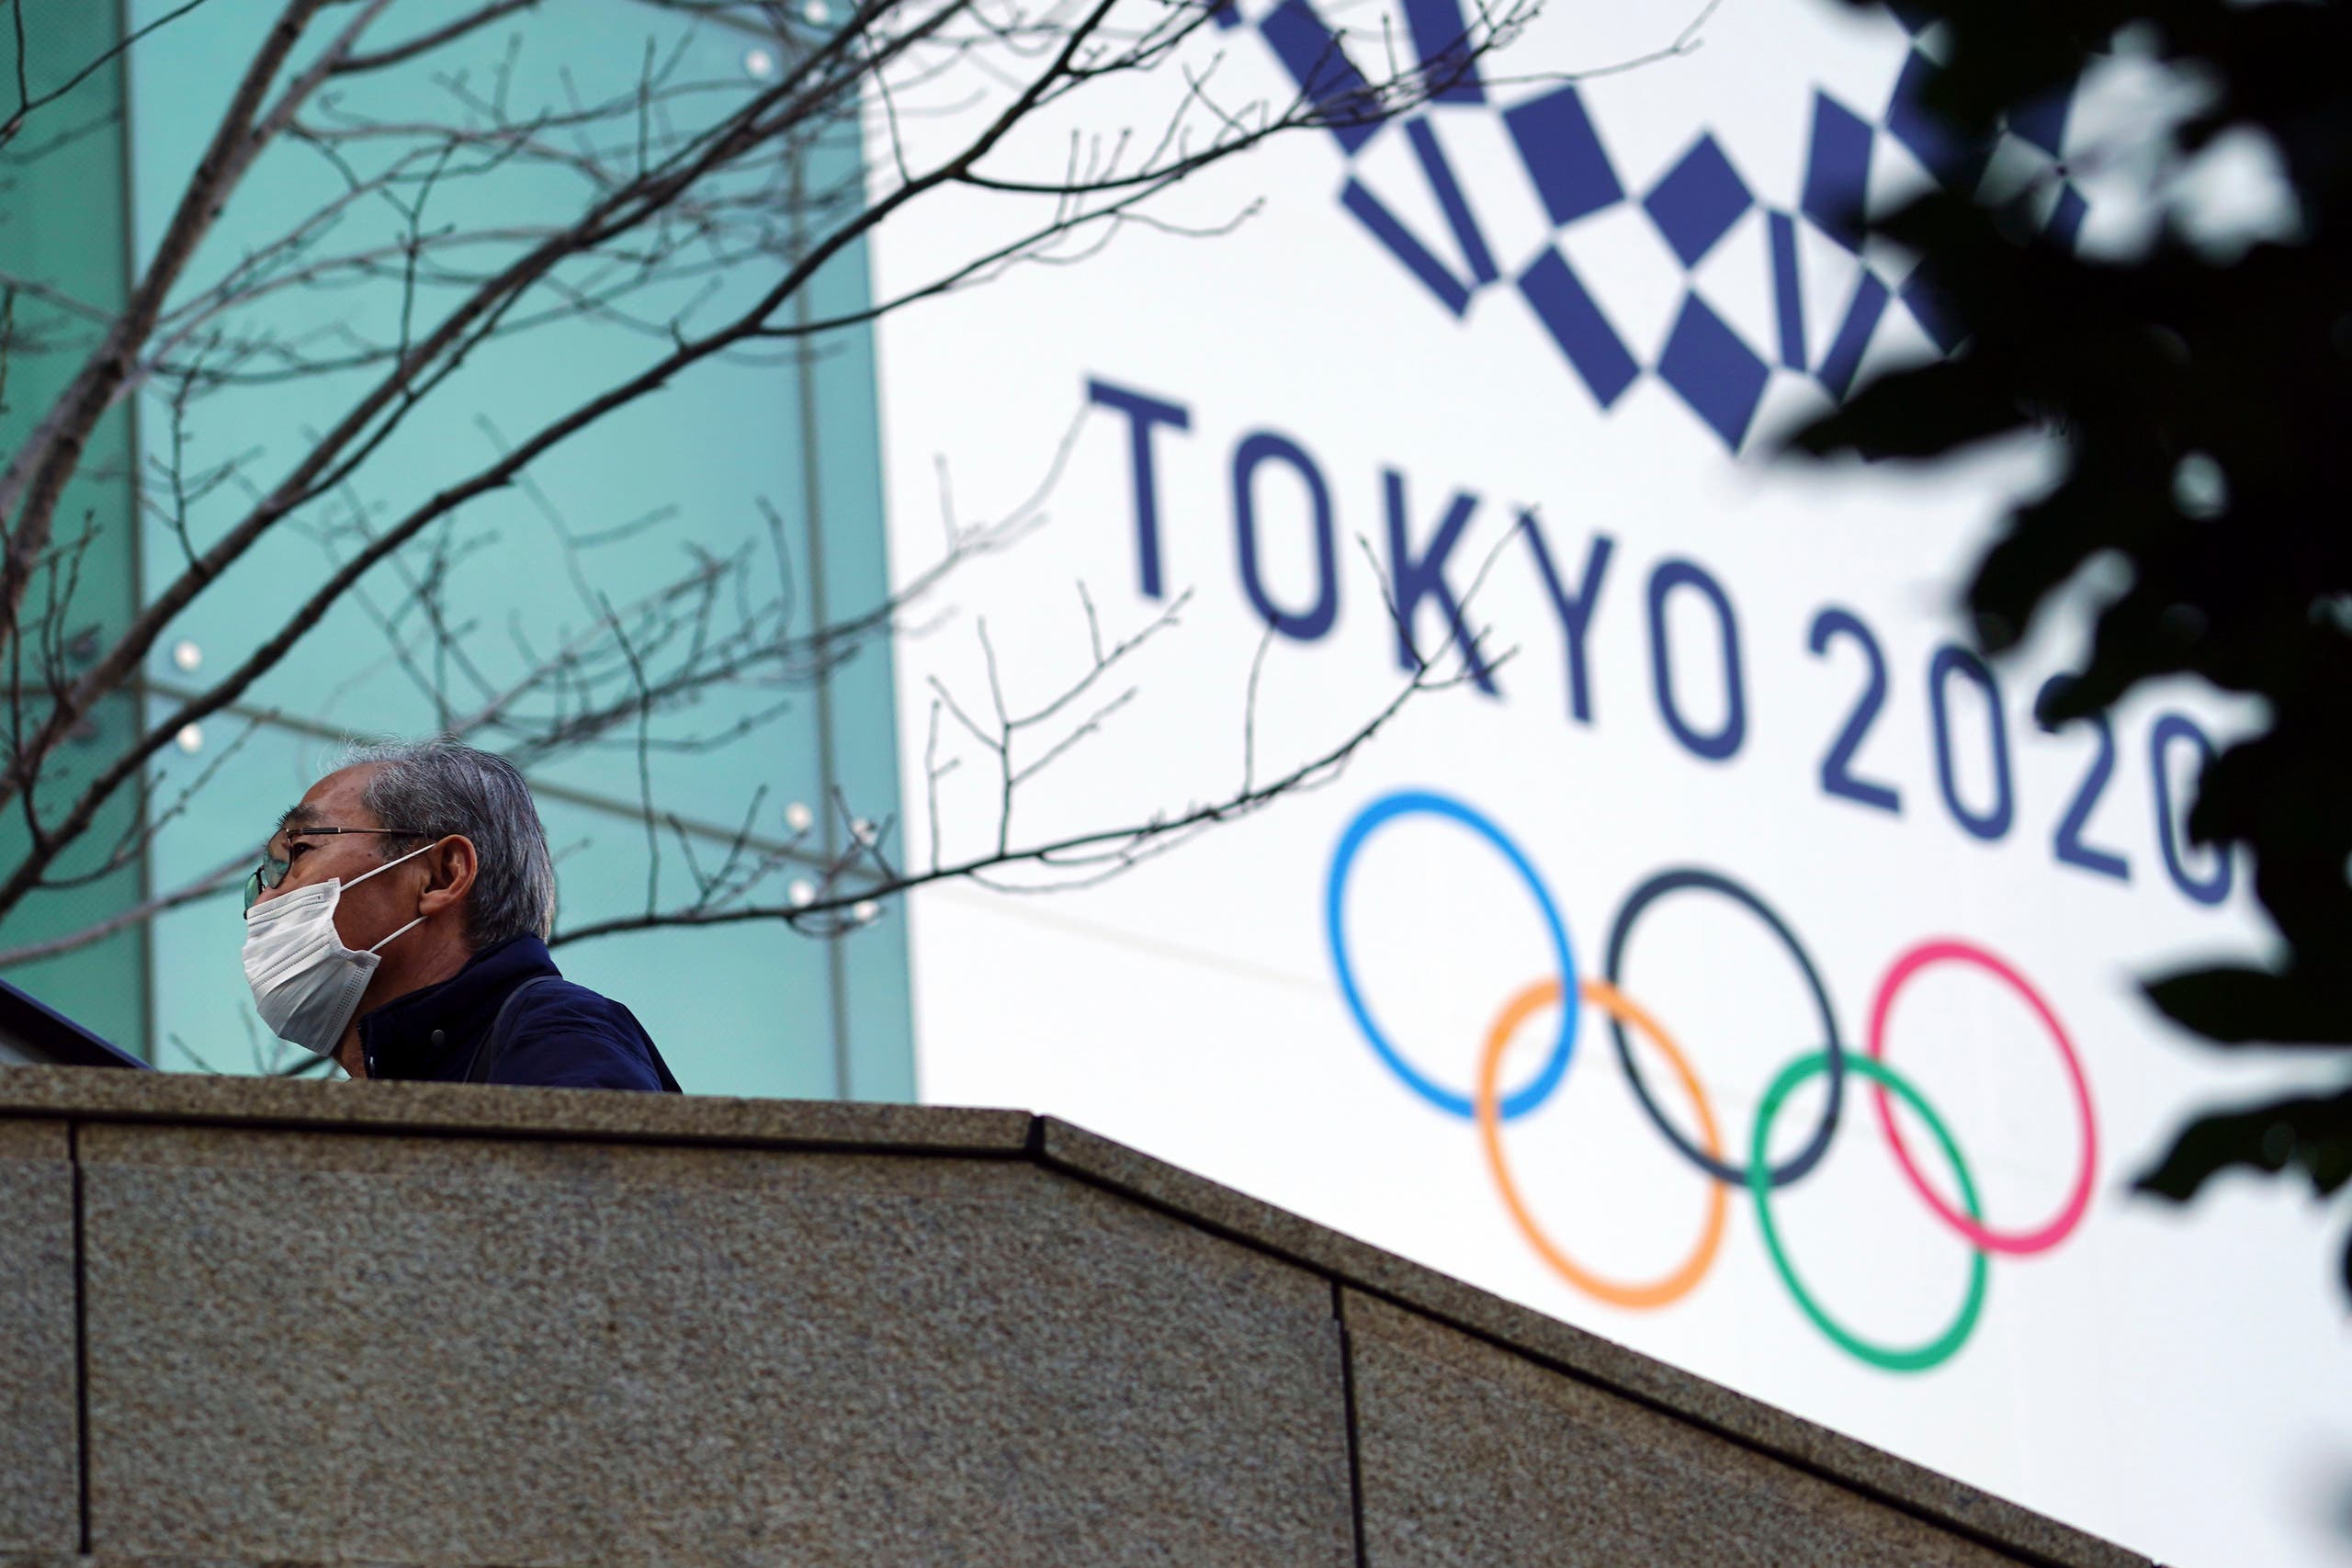 A man wearing a protective mask to help curb the spread of the coronavirus walks near the banner for the Tokyo 2020 Olympic Games Thursday, Feb. 25, 2021. (File photo: AP)